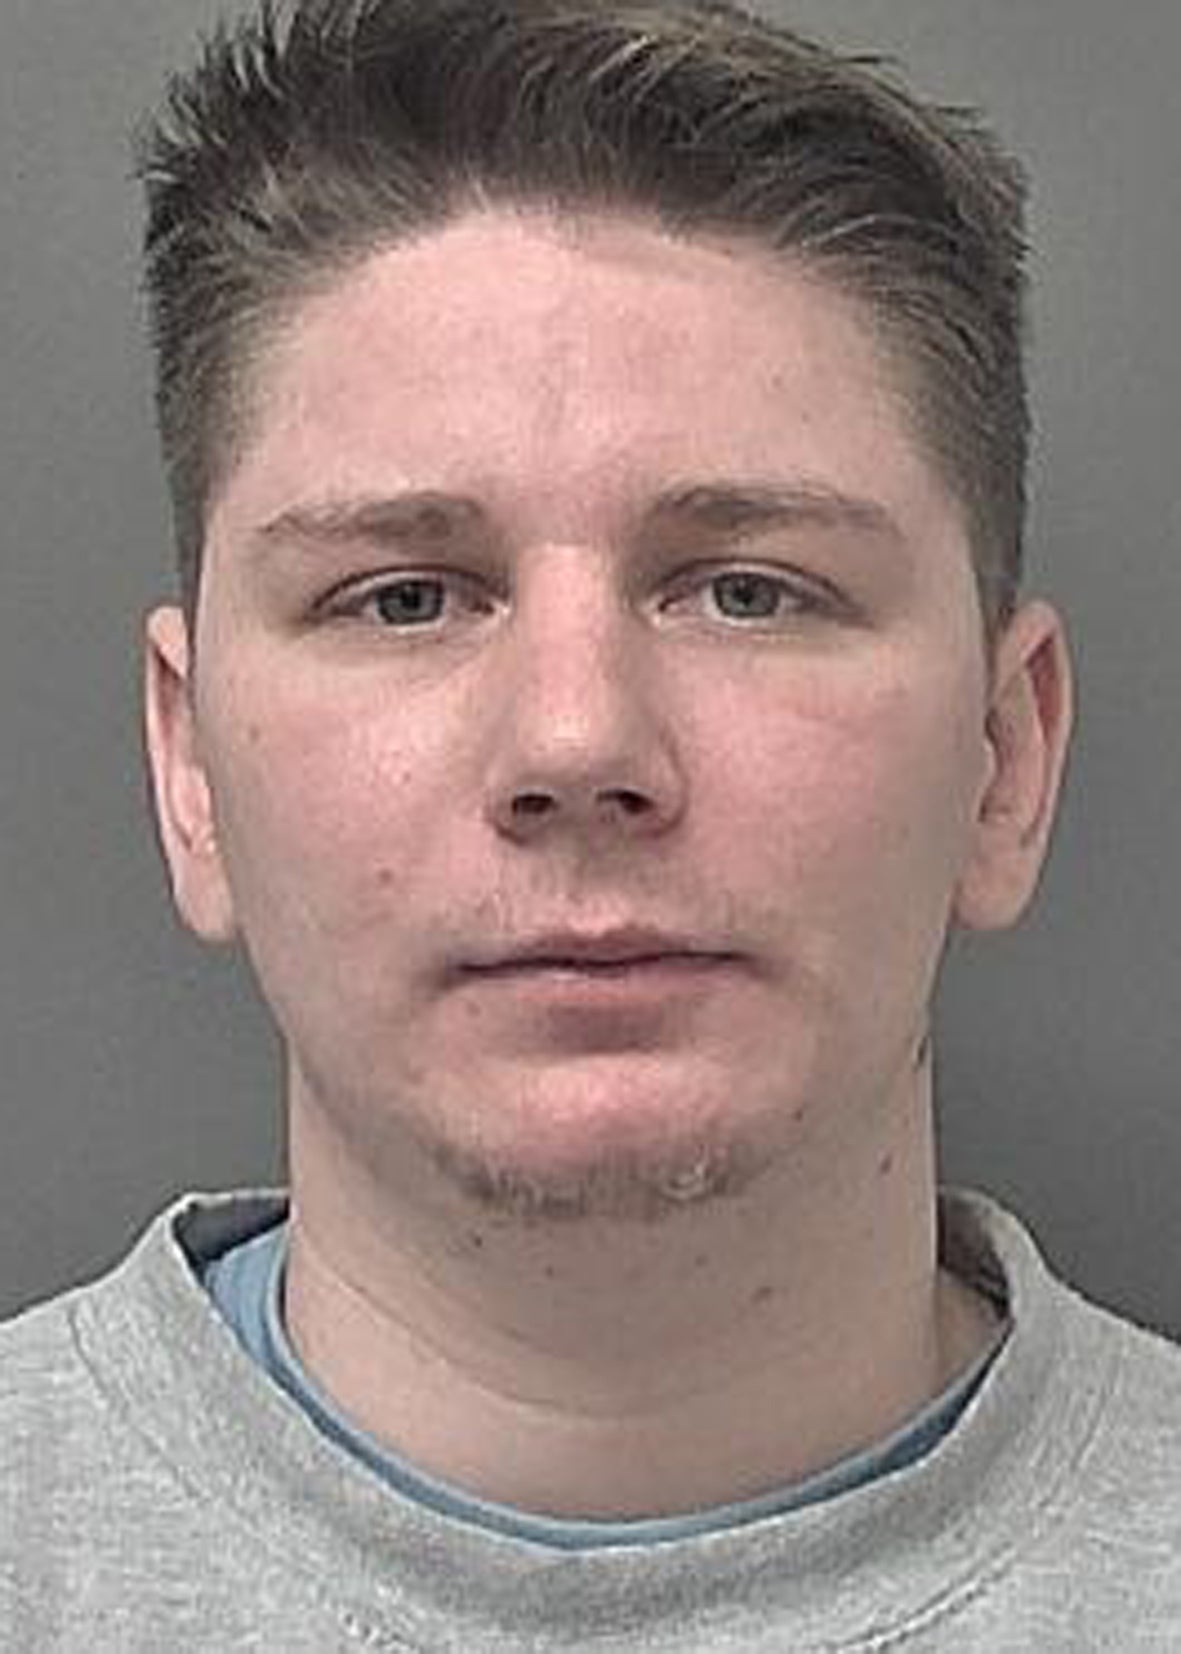 Pawel Relowicz was jailed for 27 years after being found guilty of rape and murder